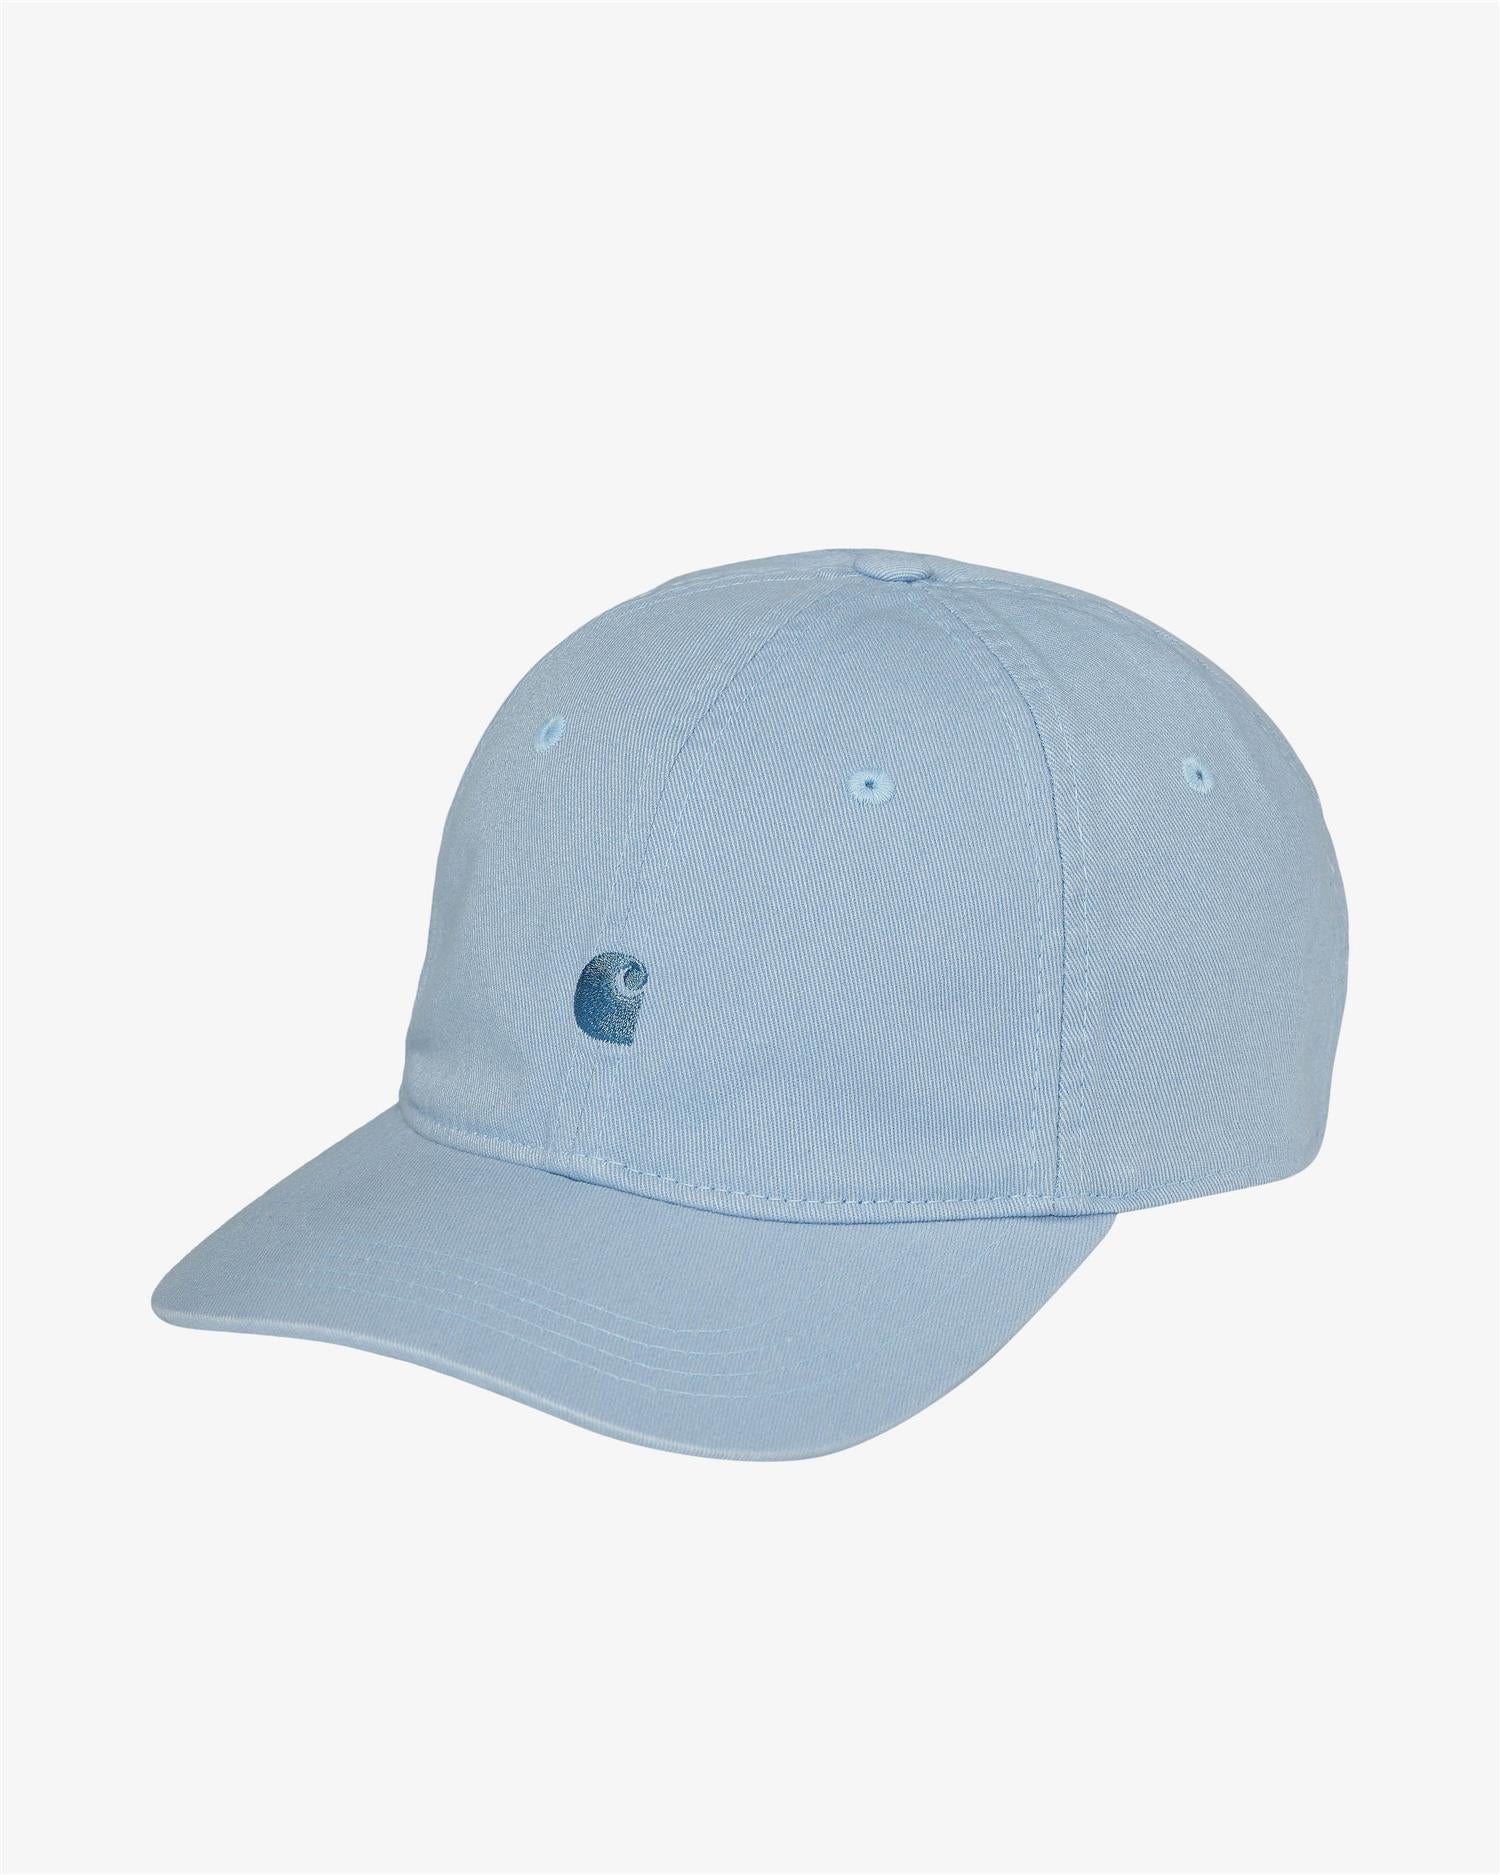 MADISON LOGO CAP - FROSTED BLUE